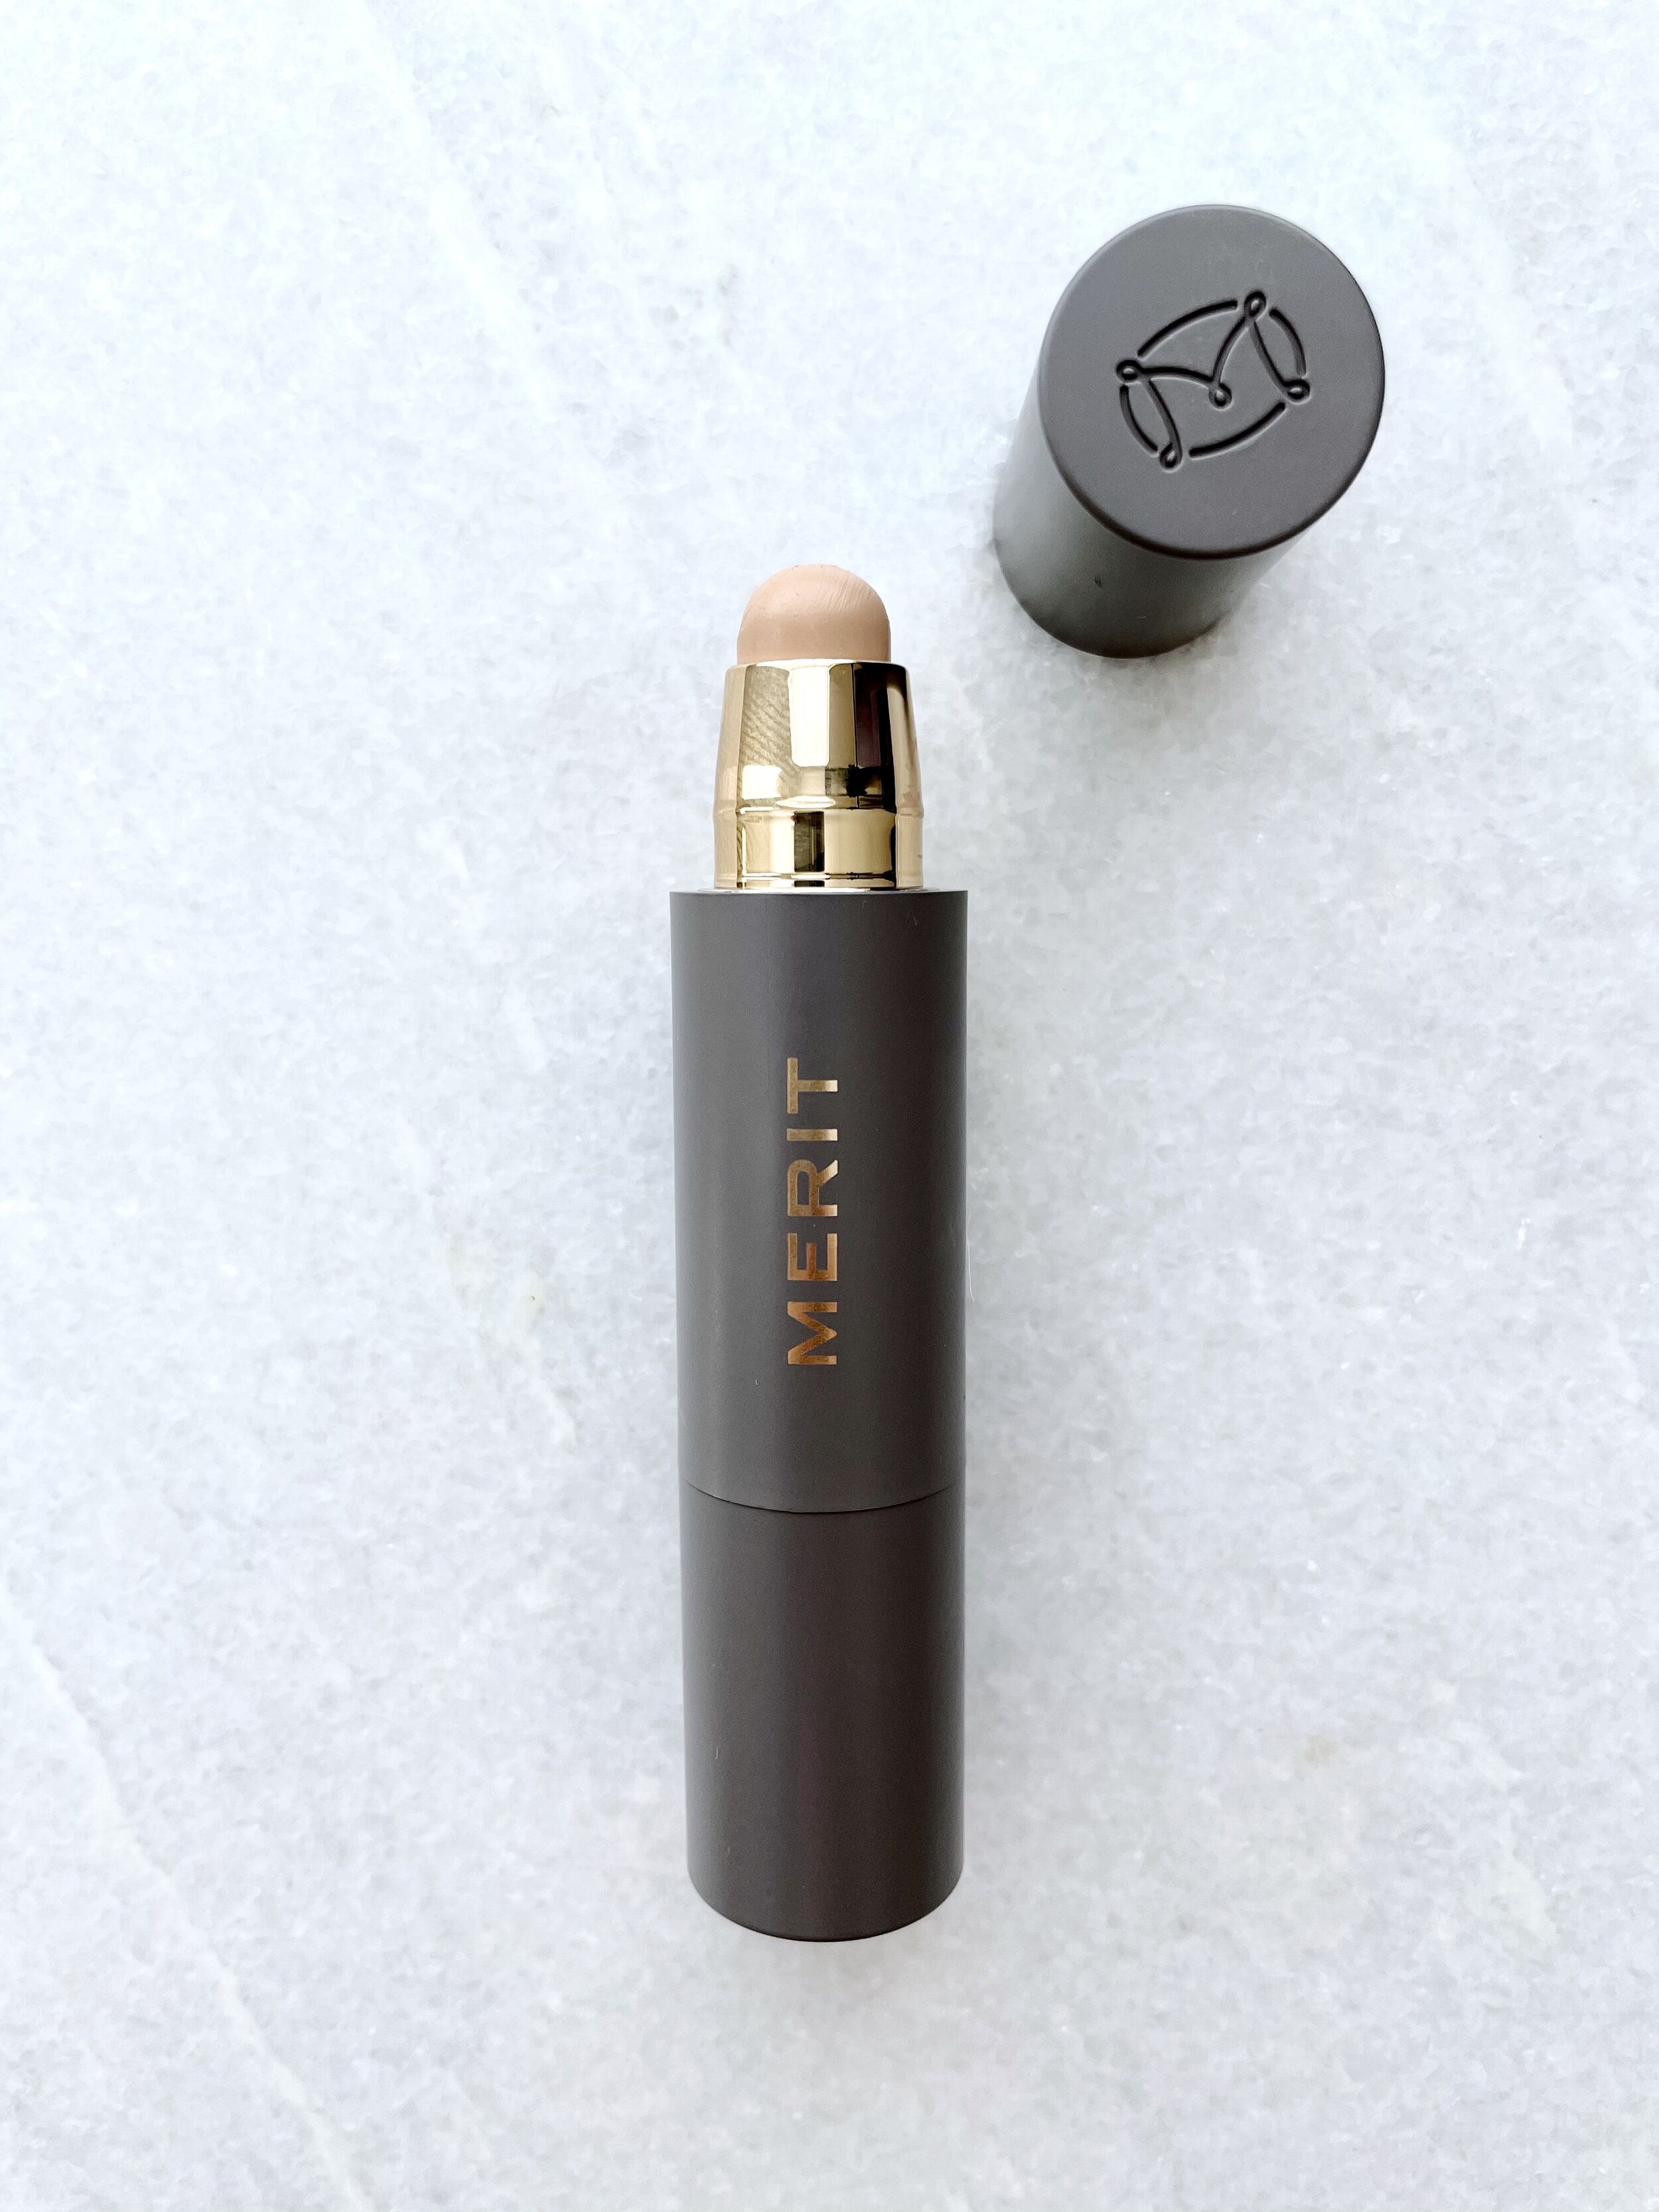 My Honest Review of the Merit The Minimalist Perfecting Complexion  Foundation and Concealer Stick in Bisque, The StyleShaker™ Scorecard — The  StyleShaker - A Guide to Clean Beauty, Skincare & More.